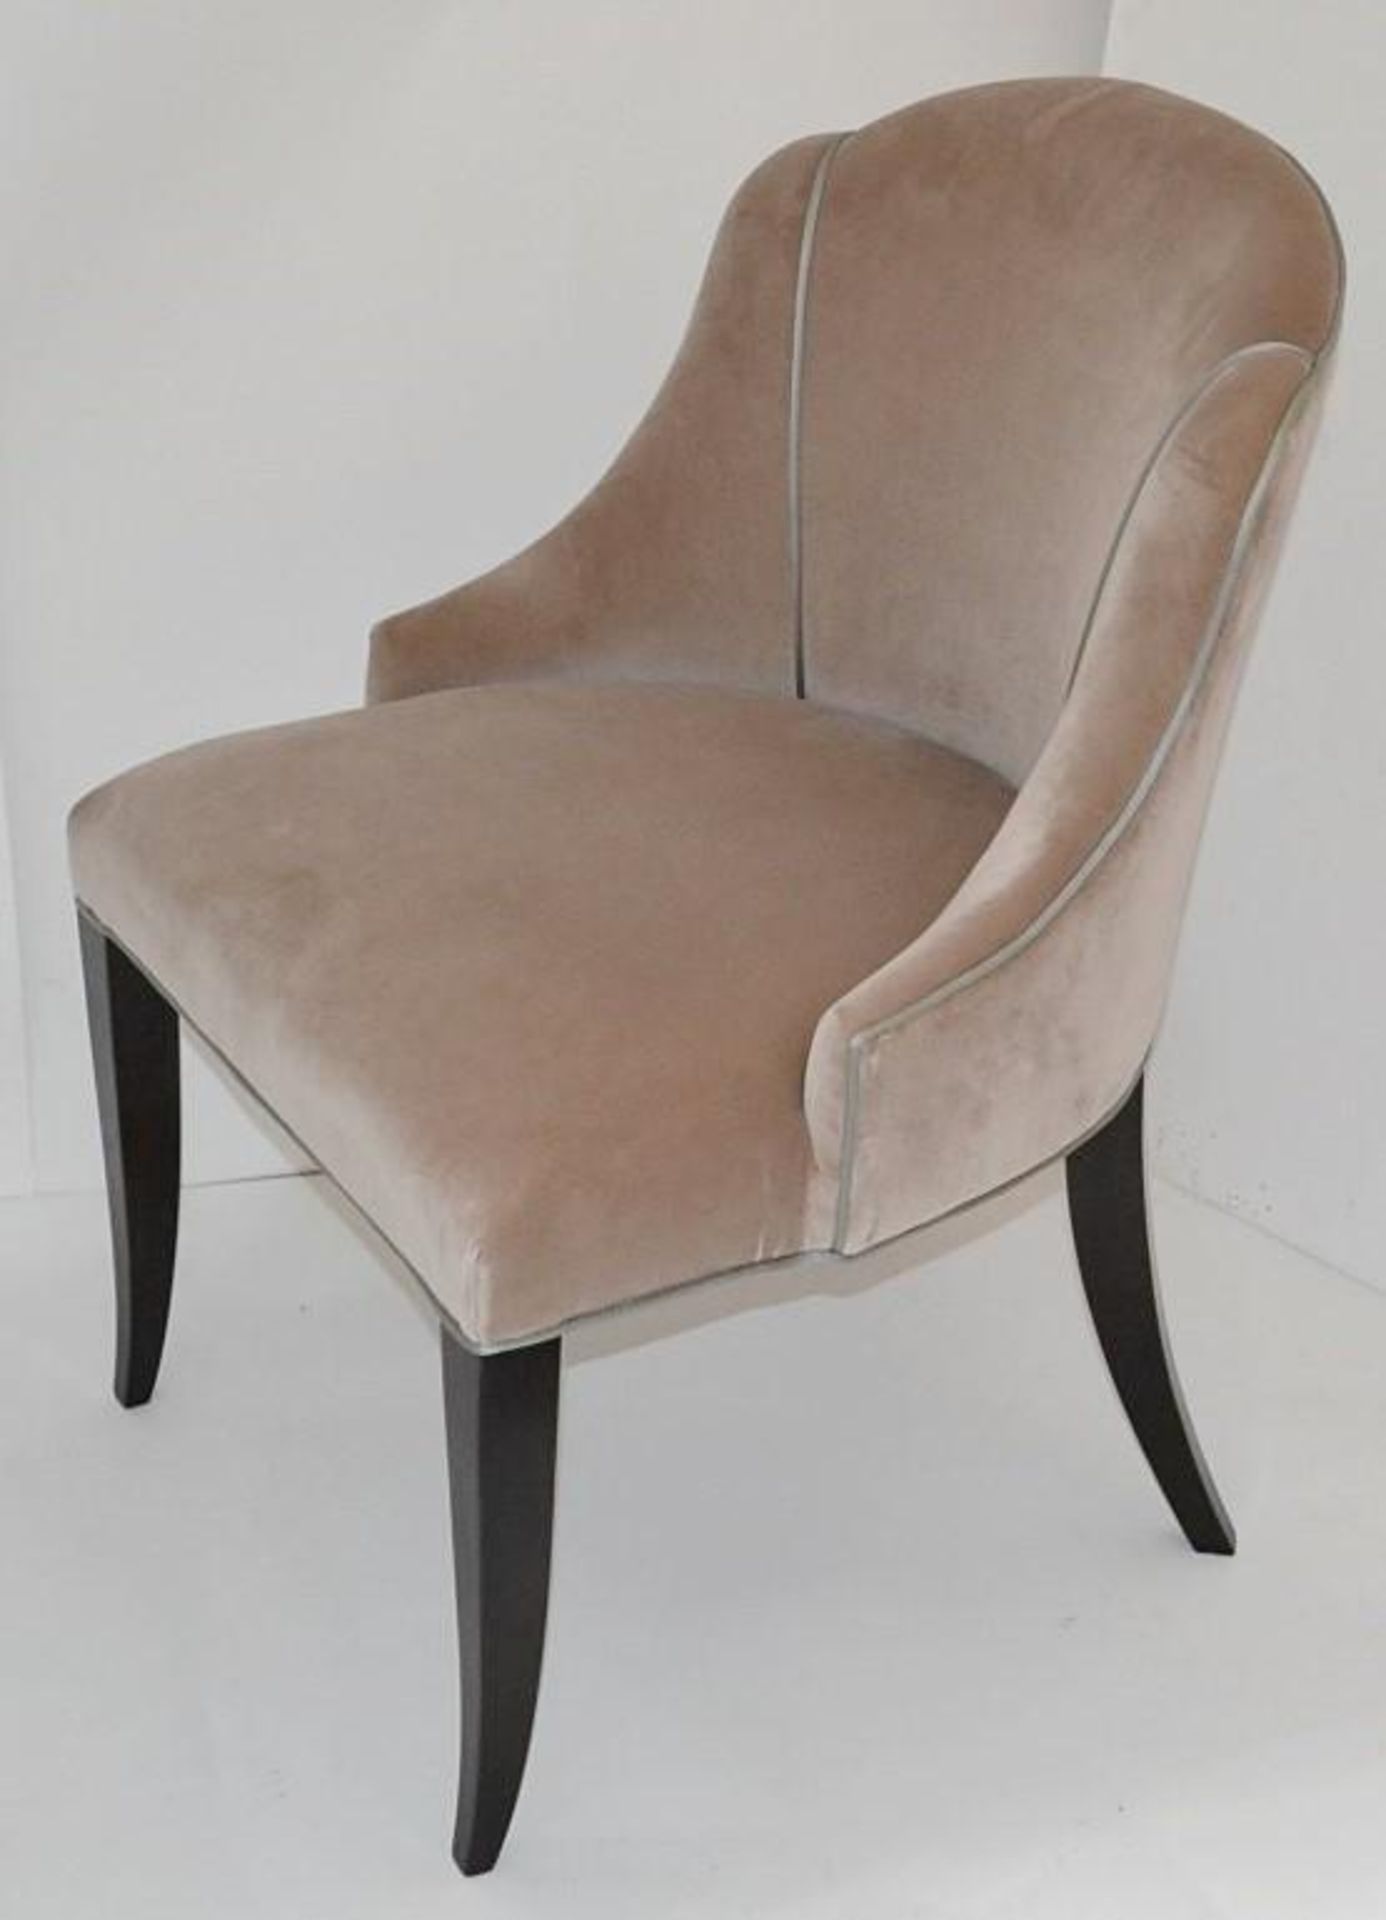 1 x REED &amp; RACKSTRAW "Cloud" Handcrafted Velvet Upholstered Chair - Dimensions: H87 x W58 x D5 - Image 8 of 14